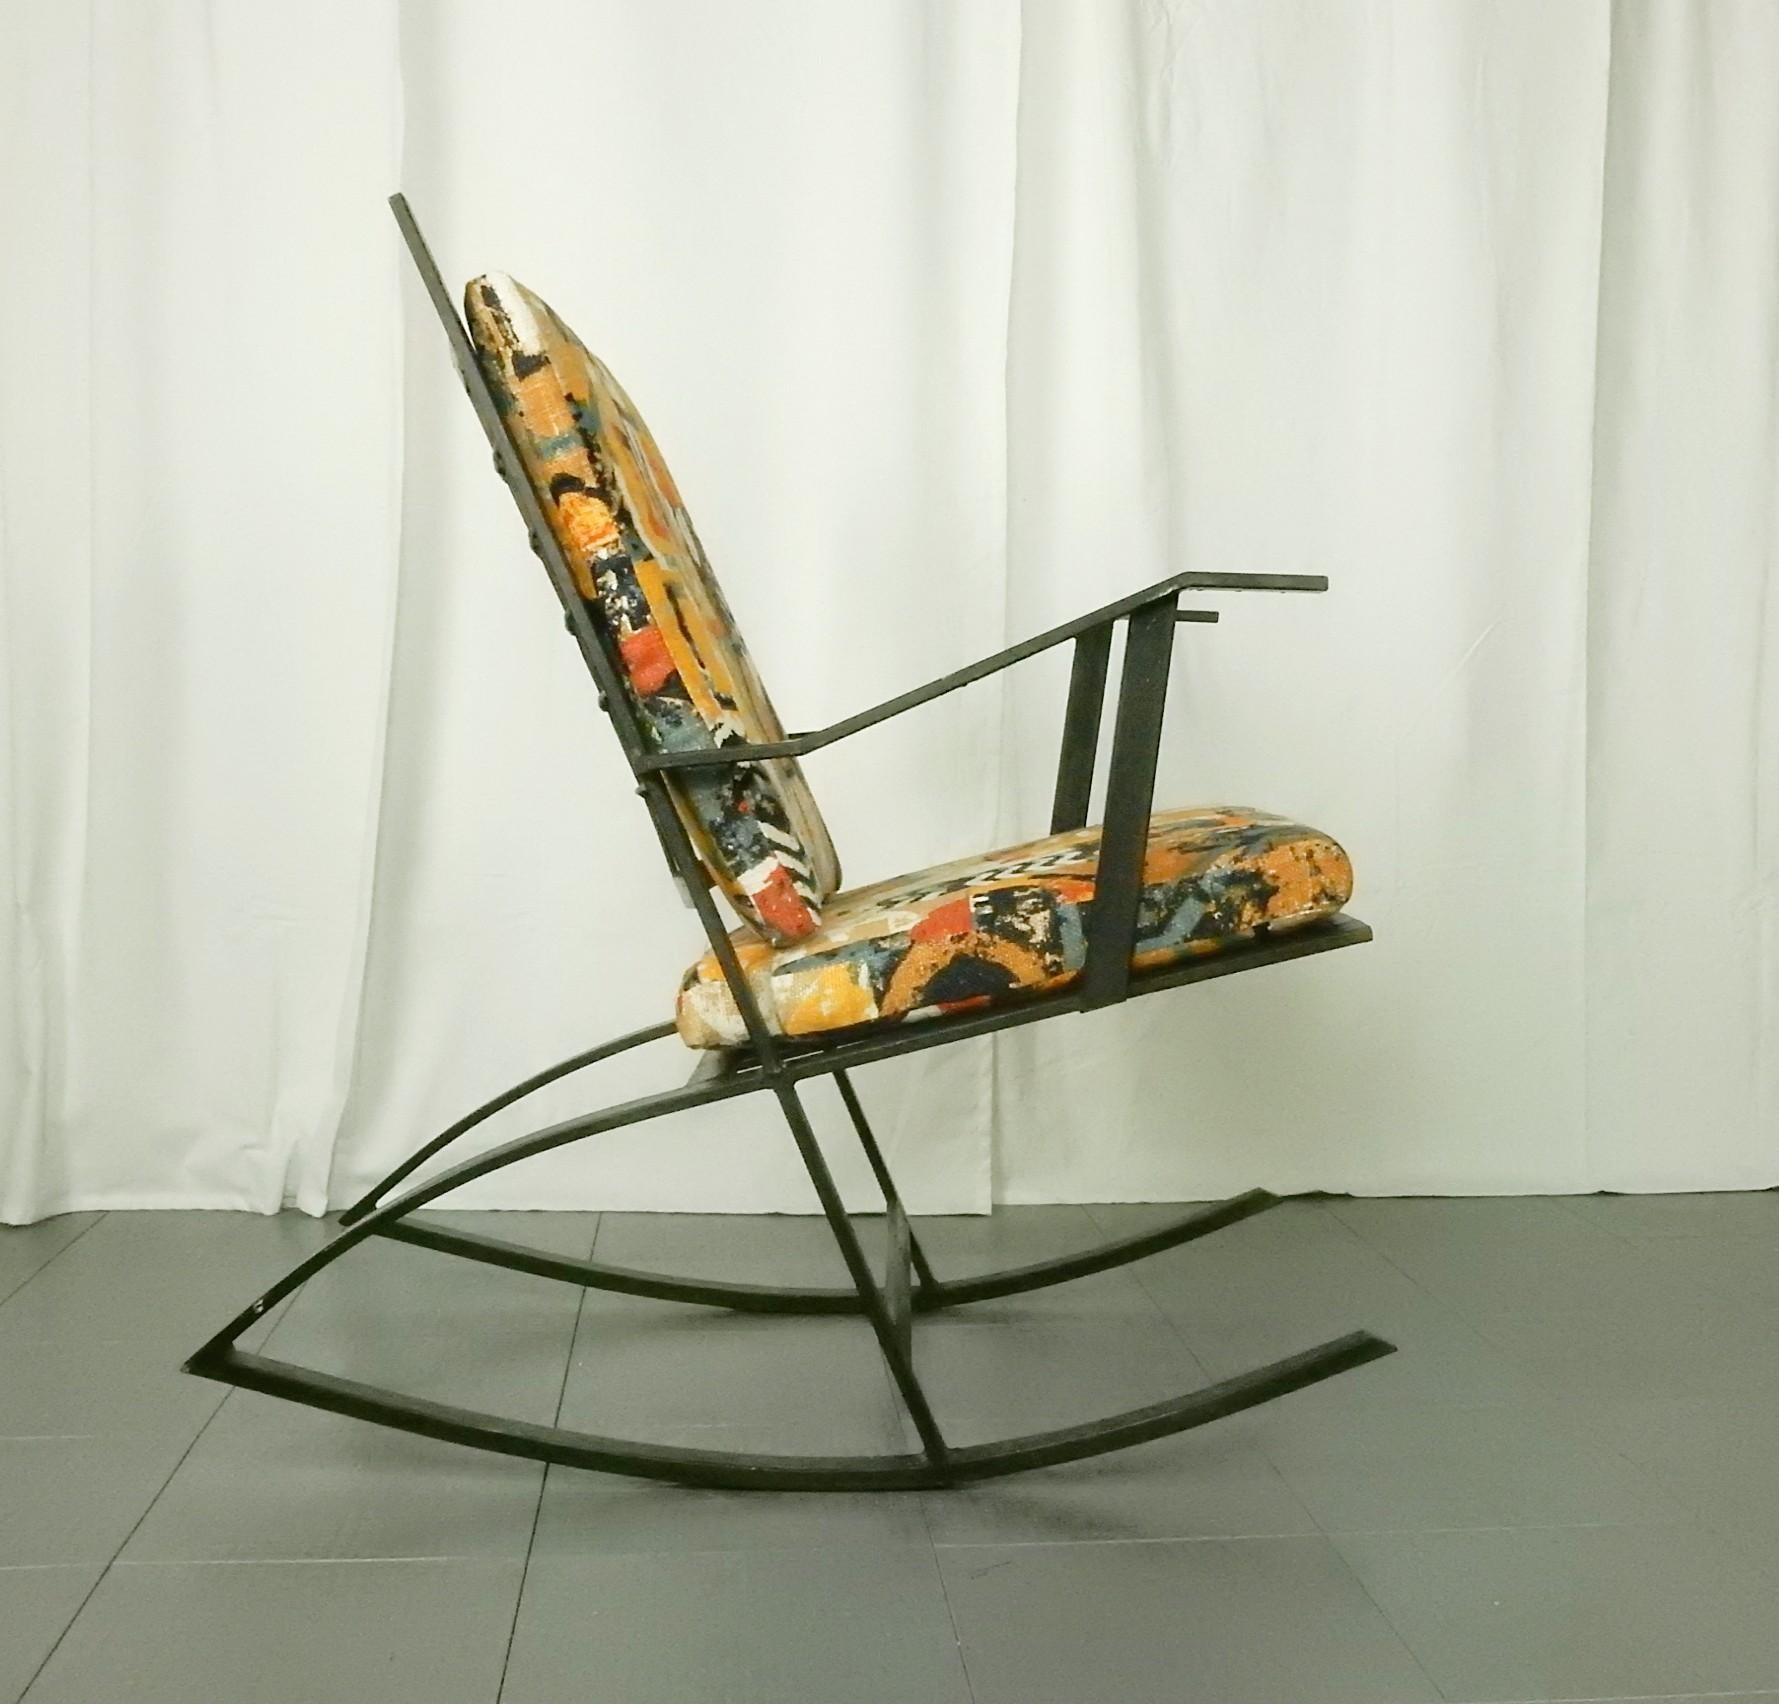 Sculpted steel rocking chair in the manner of Fredrik Kayser teak model, circa 1960s
Solid welded steel construction.
Gorgeous graphic linen fabric seat and back cushions.
One of a kind, comfortable functional piece of art.